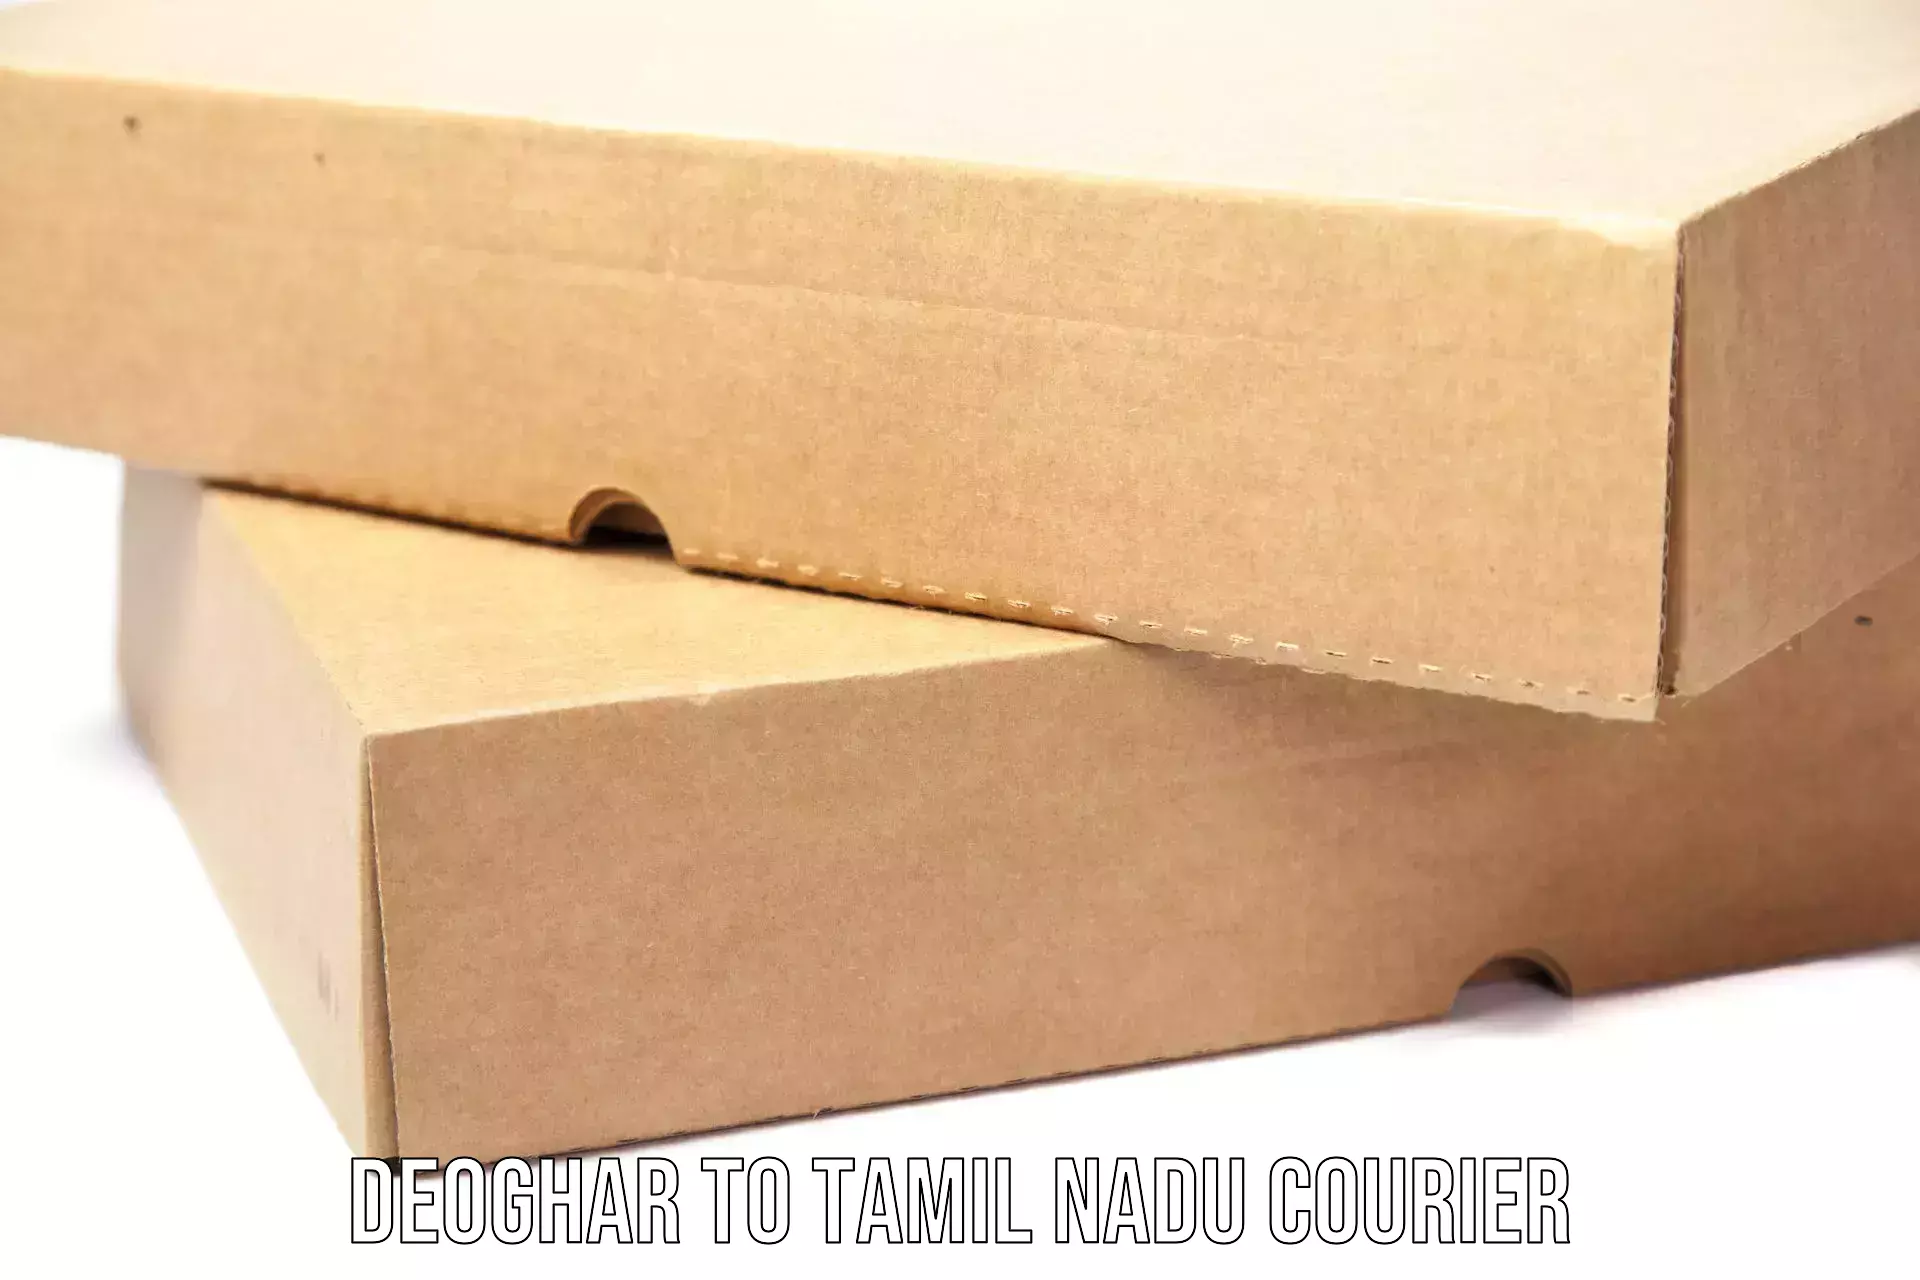 Business shipping needs Deoghar to Lalgudi